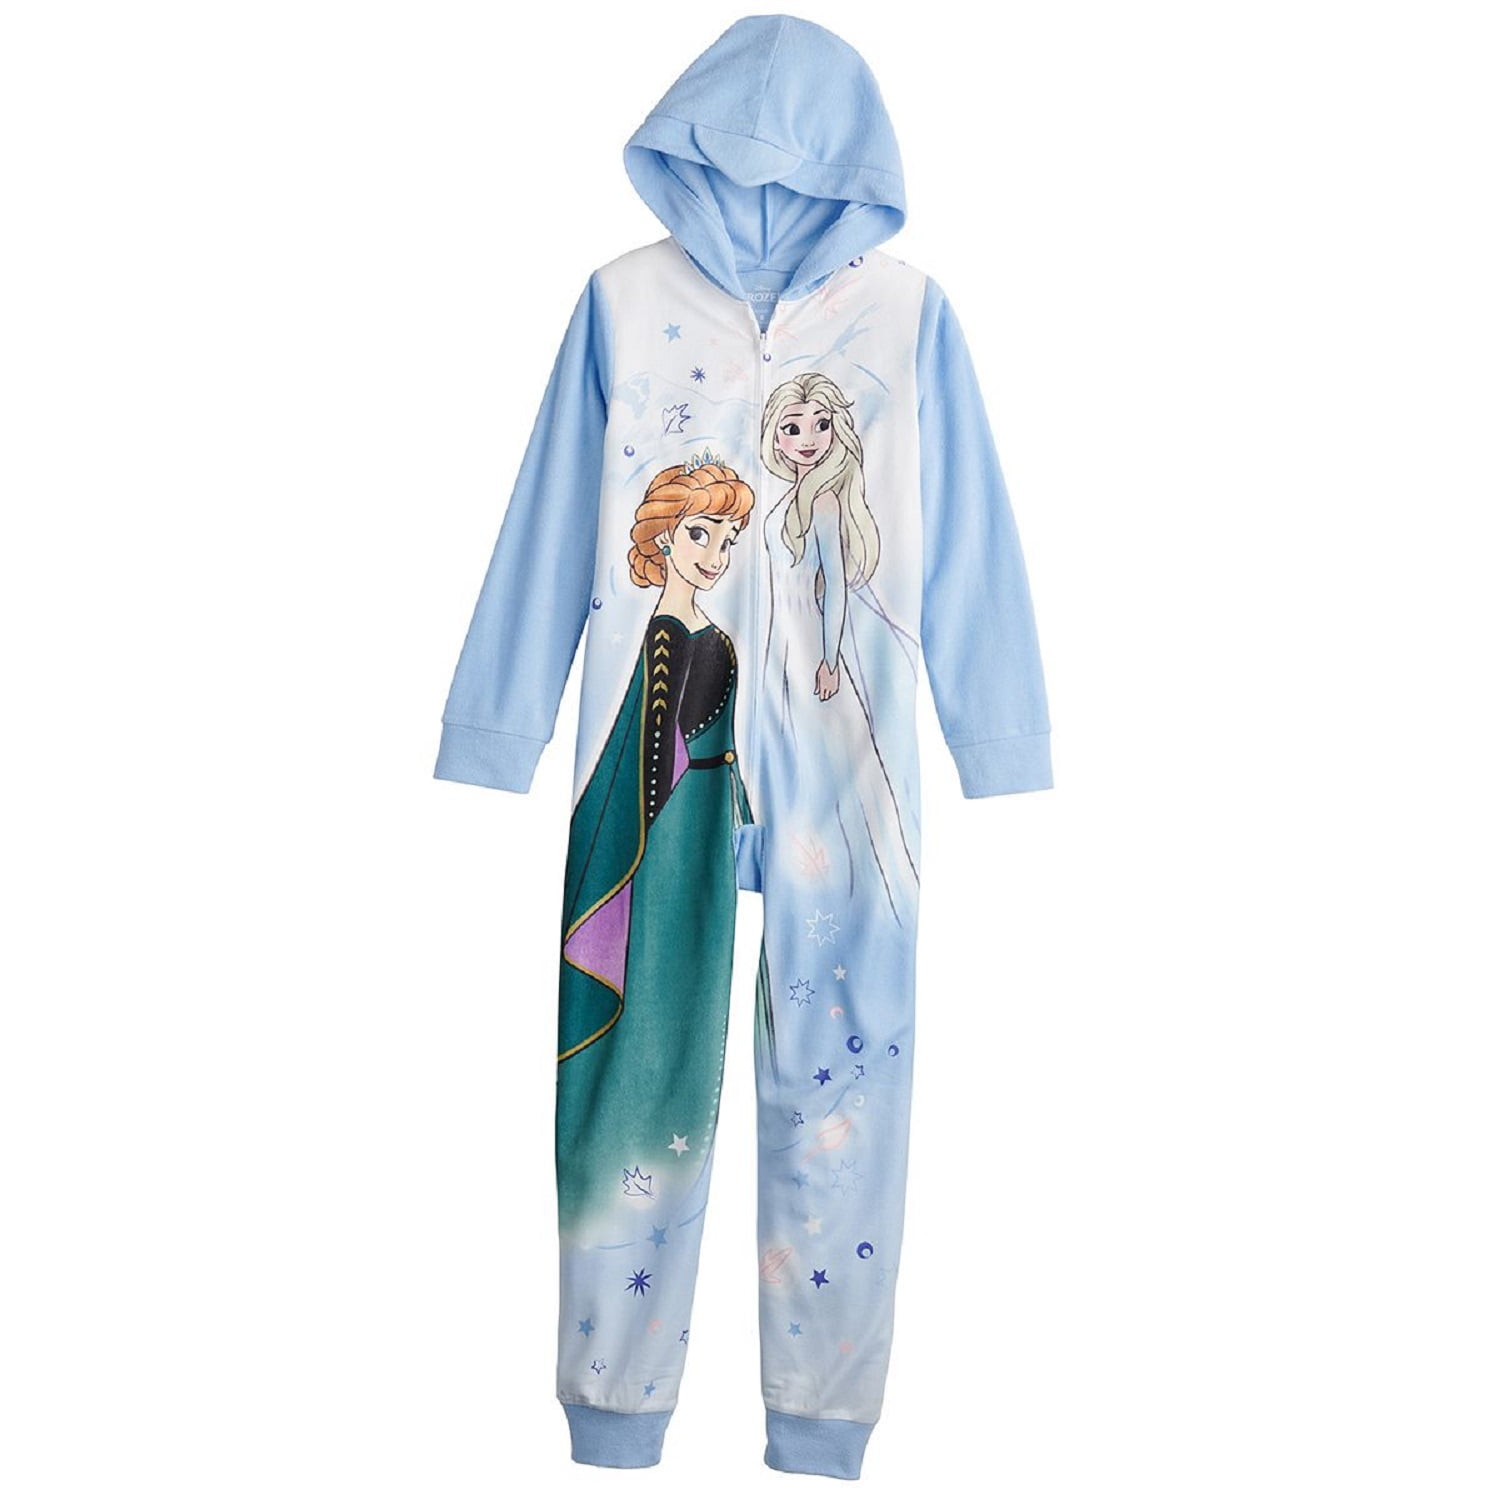 Onesie for Girls The for Girls Age 2-10 Disney Frozen 2 Girls Pyjamas Princess Anna Elsa Clothes for Kids PJs Jumpsuit Costume All in One Children Playsuit 